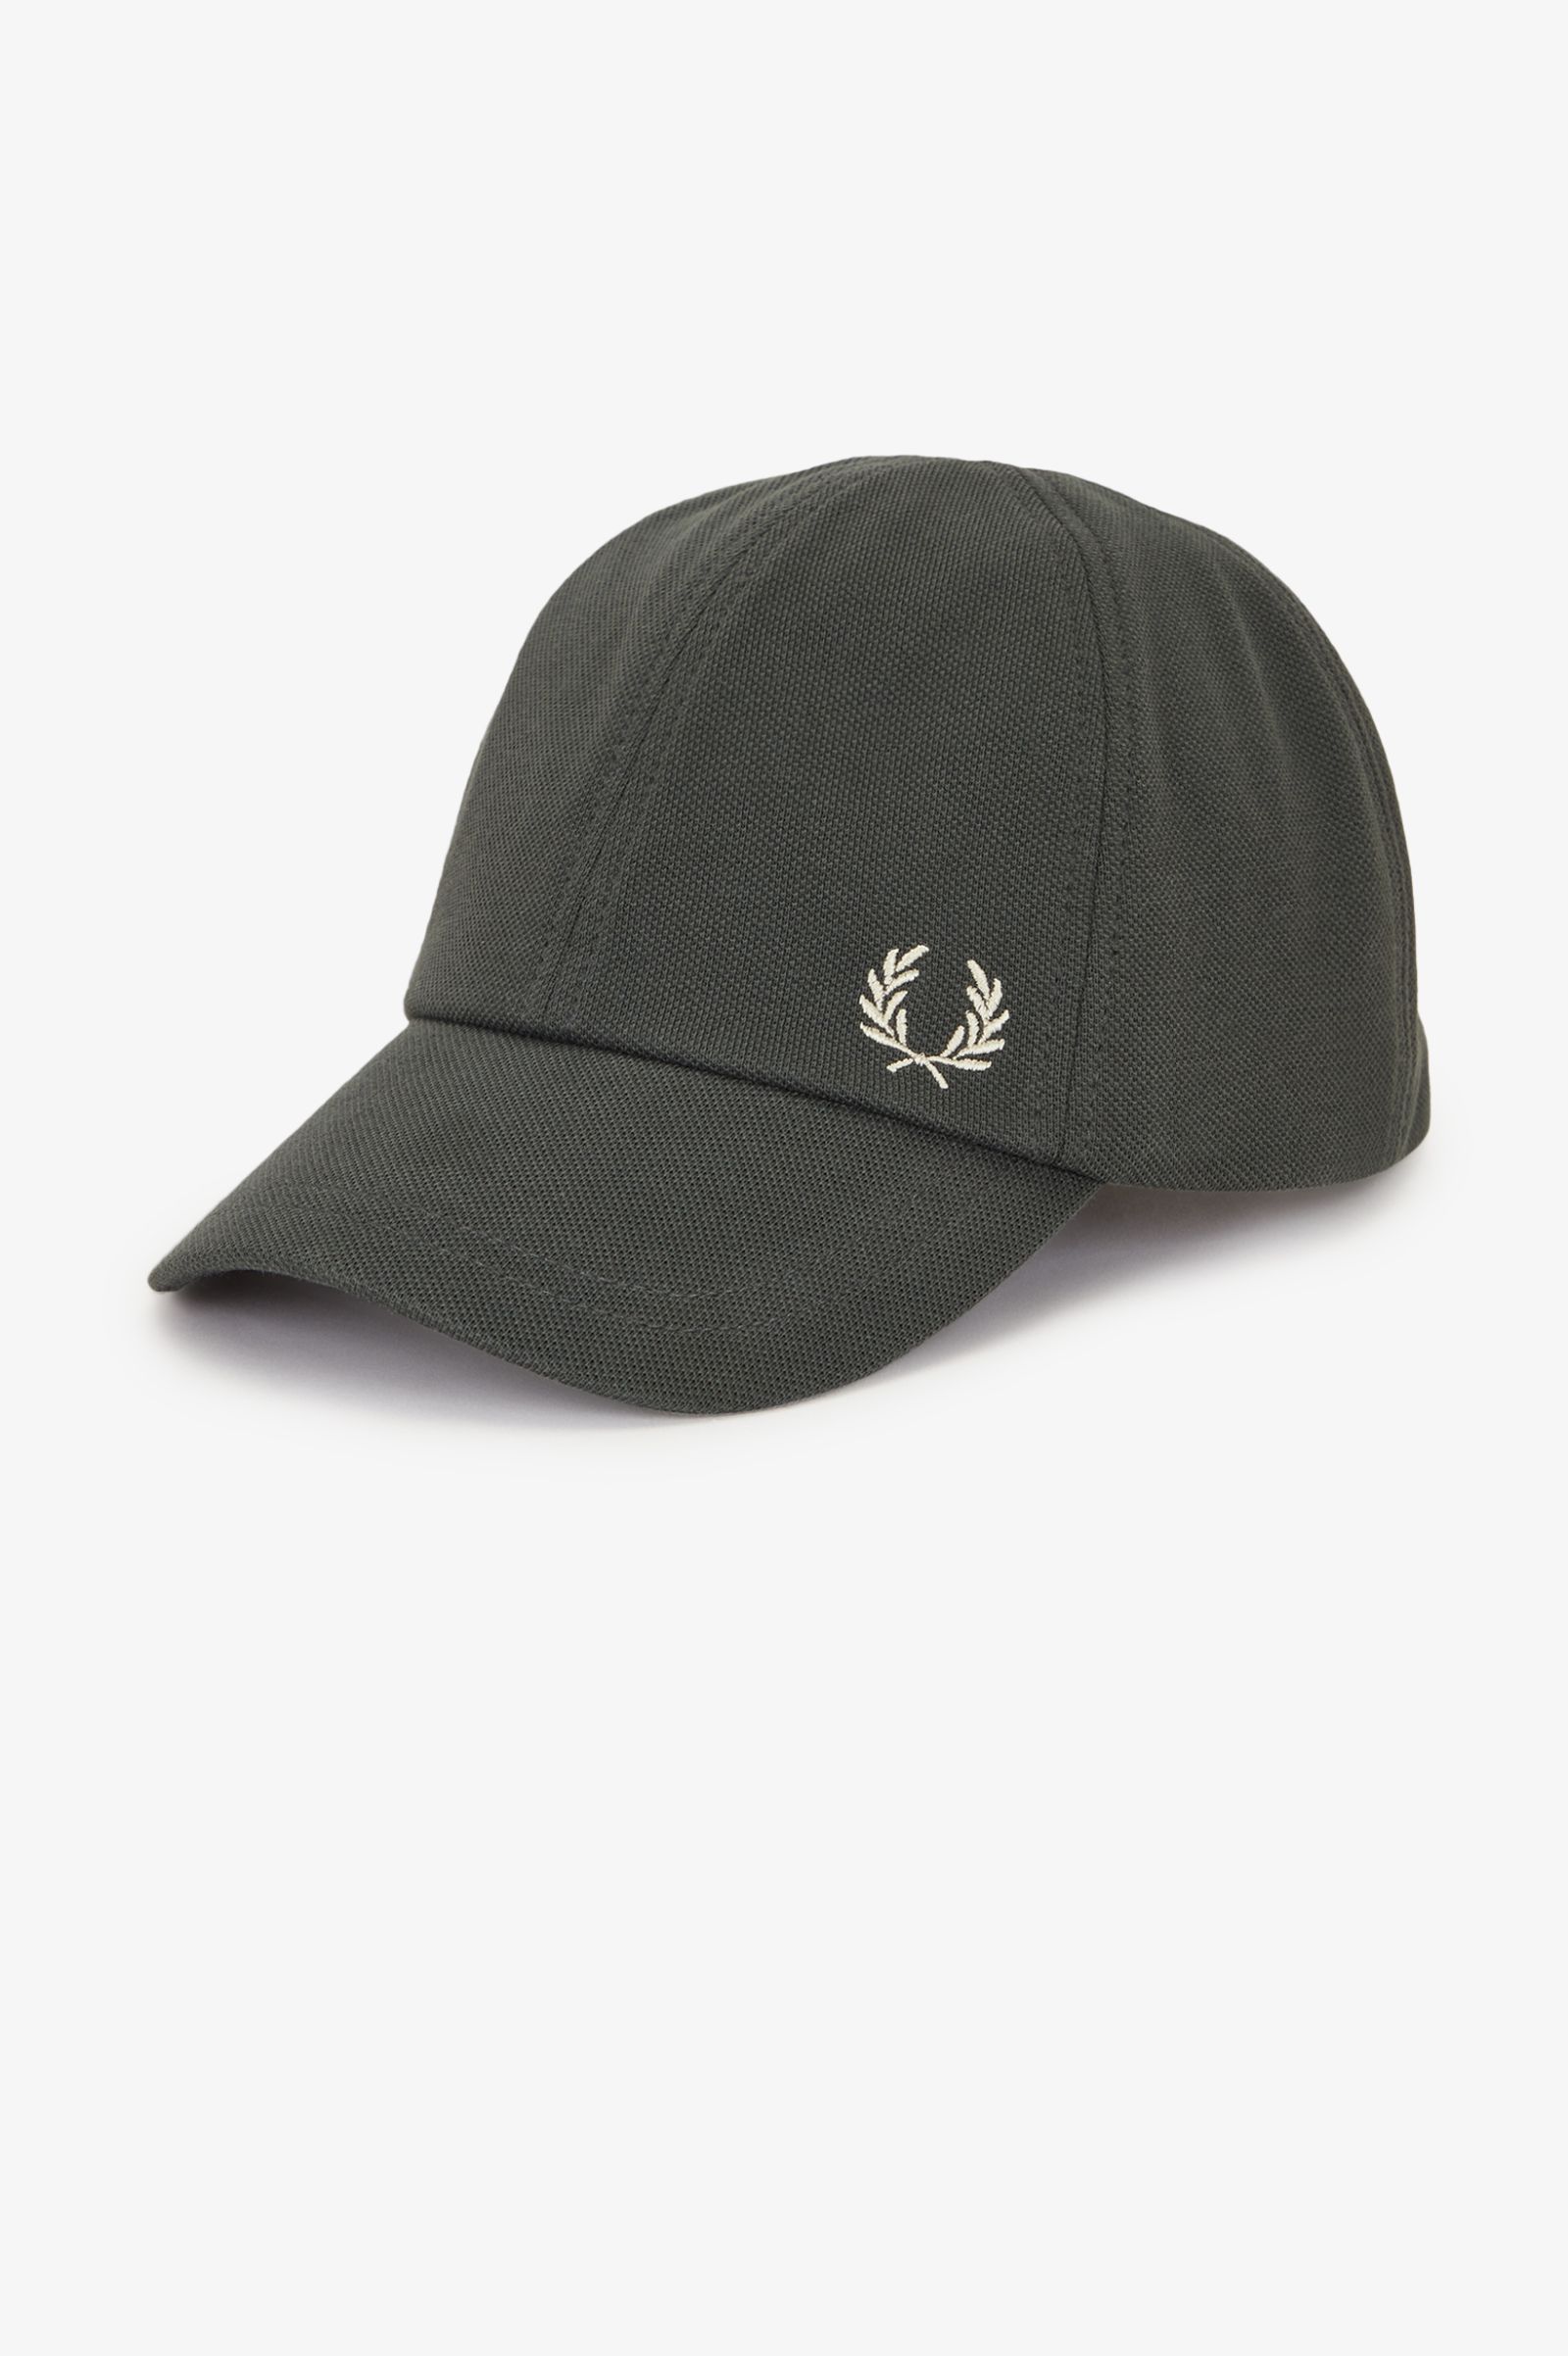 Fred Perry Pique Classic Cap In Field Green / Oatmeal 